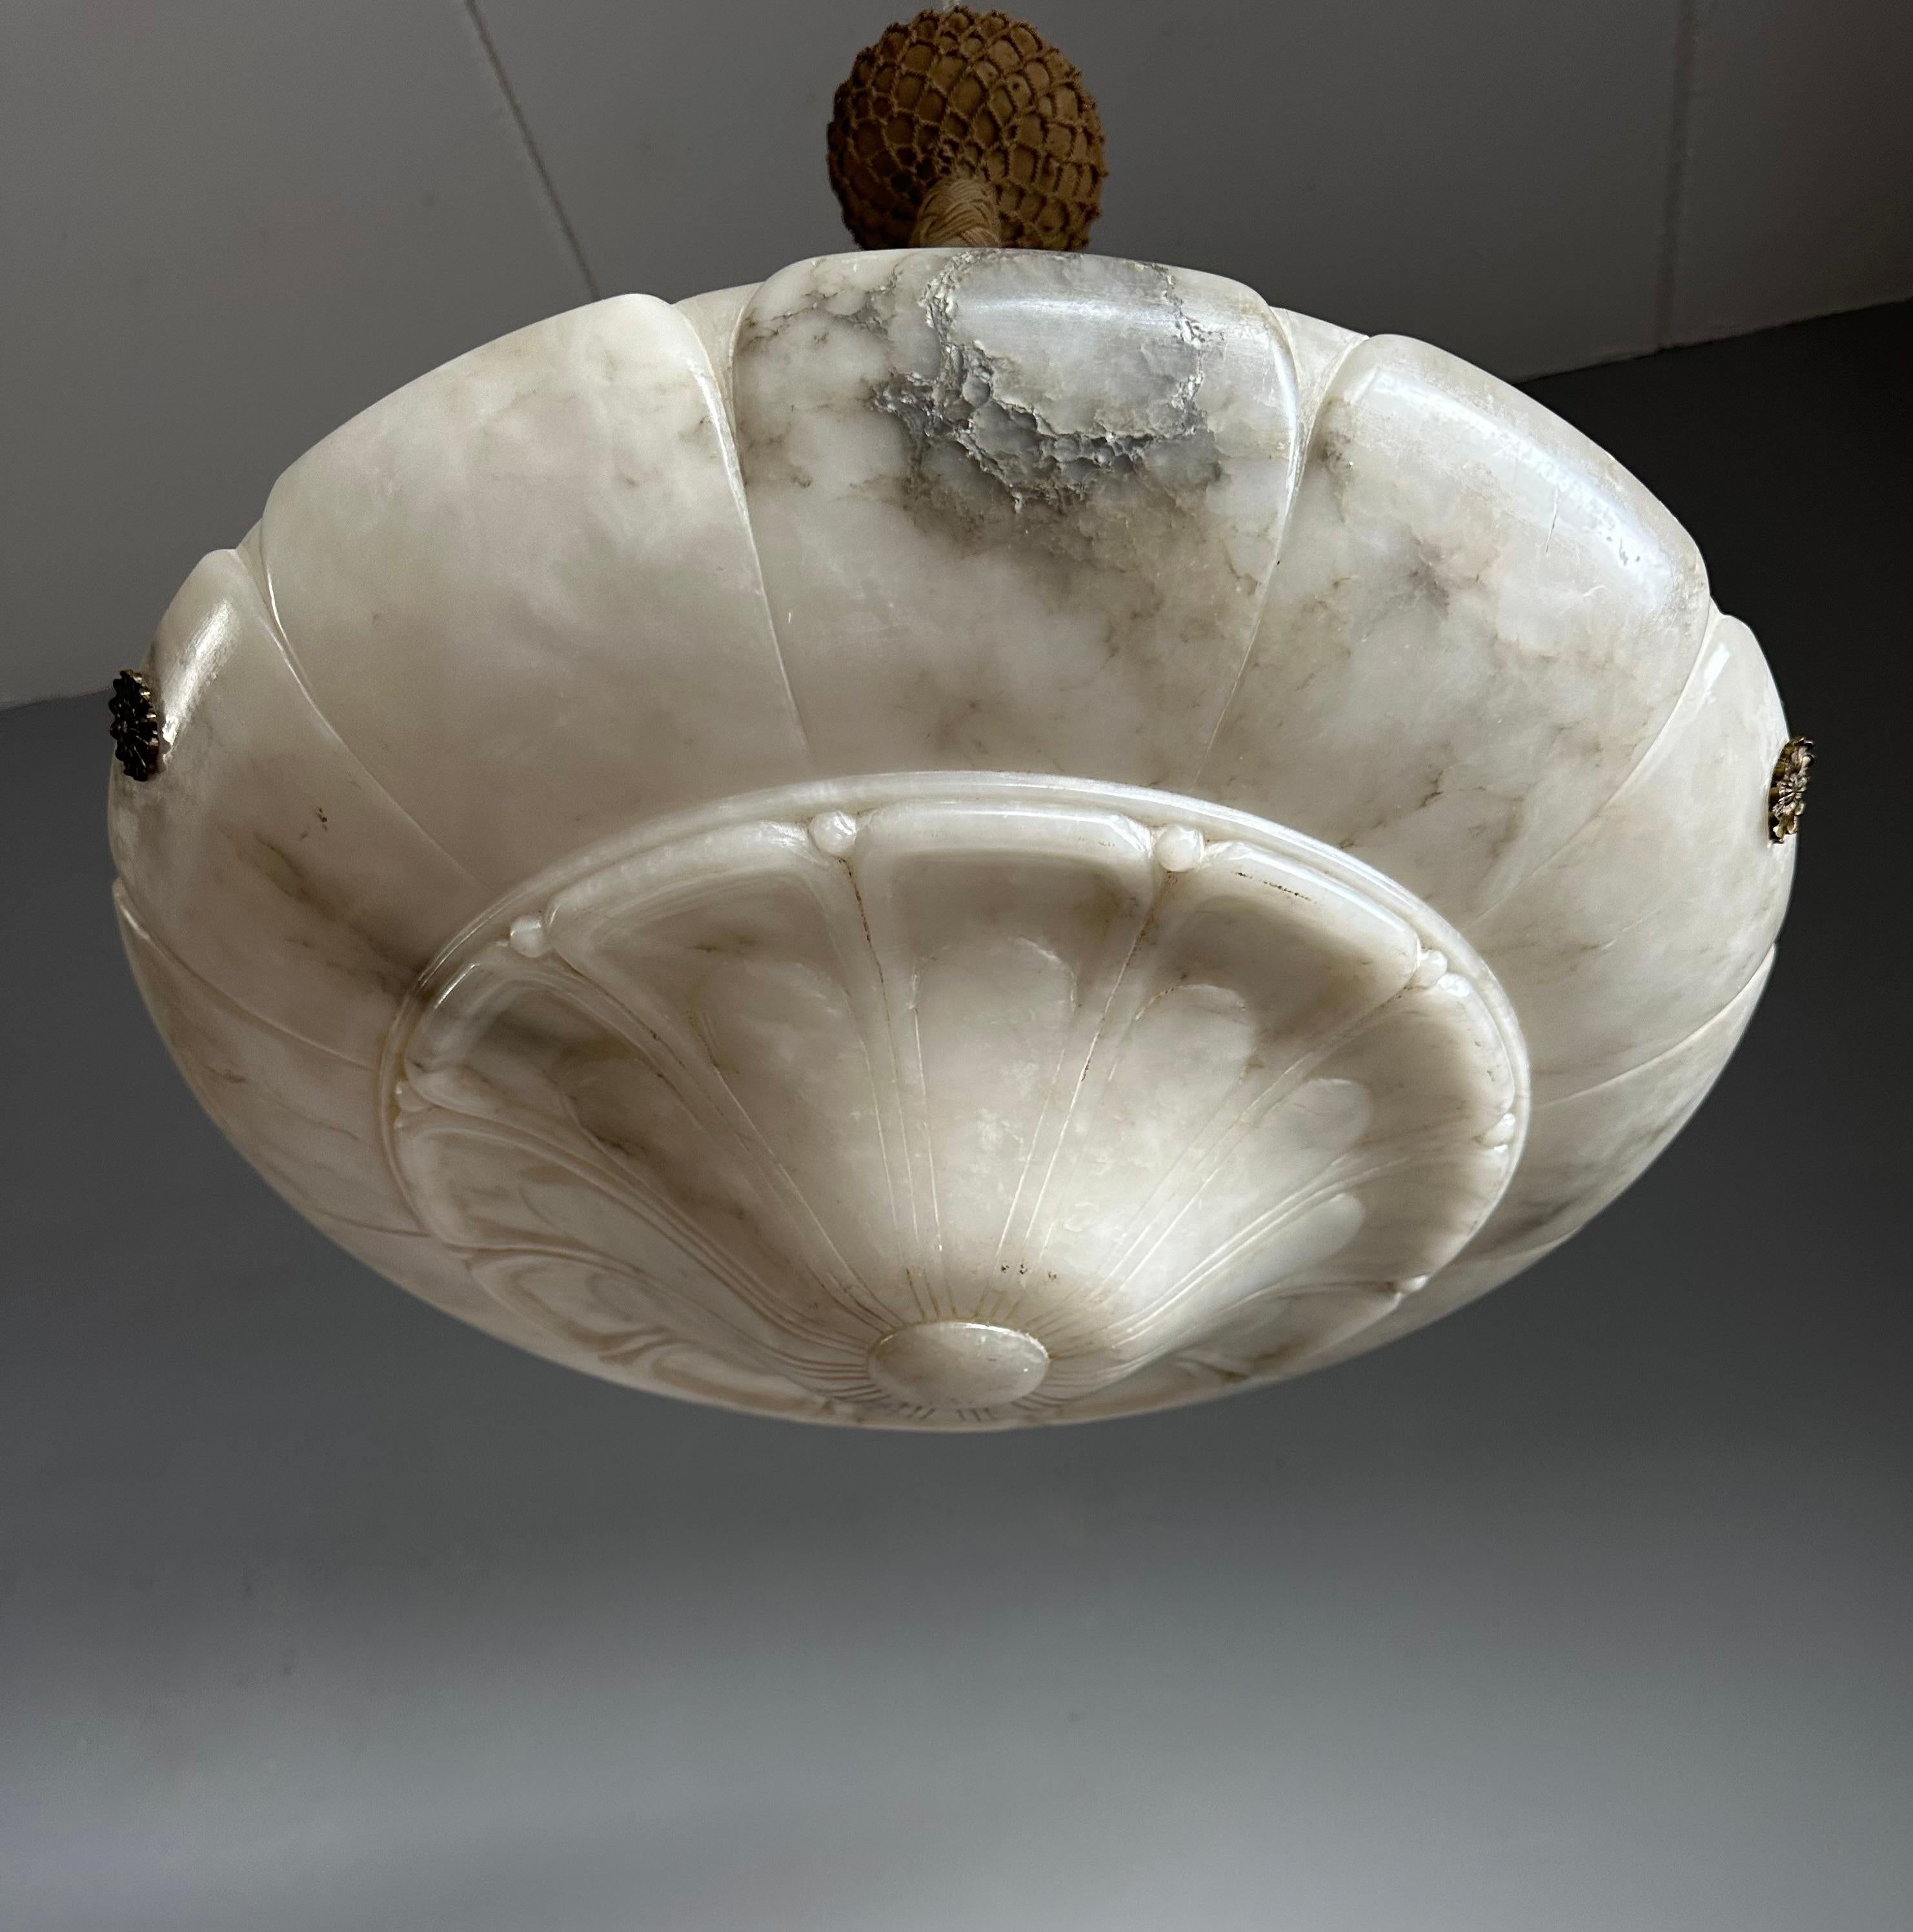 Top class antique chandelier with a unique alabaster stylish flower design shade and perfect hanging on a hand-knotted rope and canopy.

Thanks to its extra large size and mint condition this alabaster chandelier will light up your days and evenings